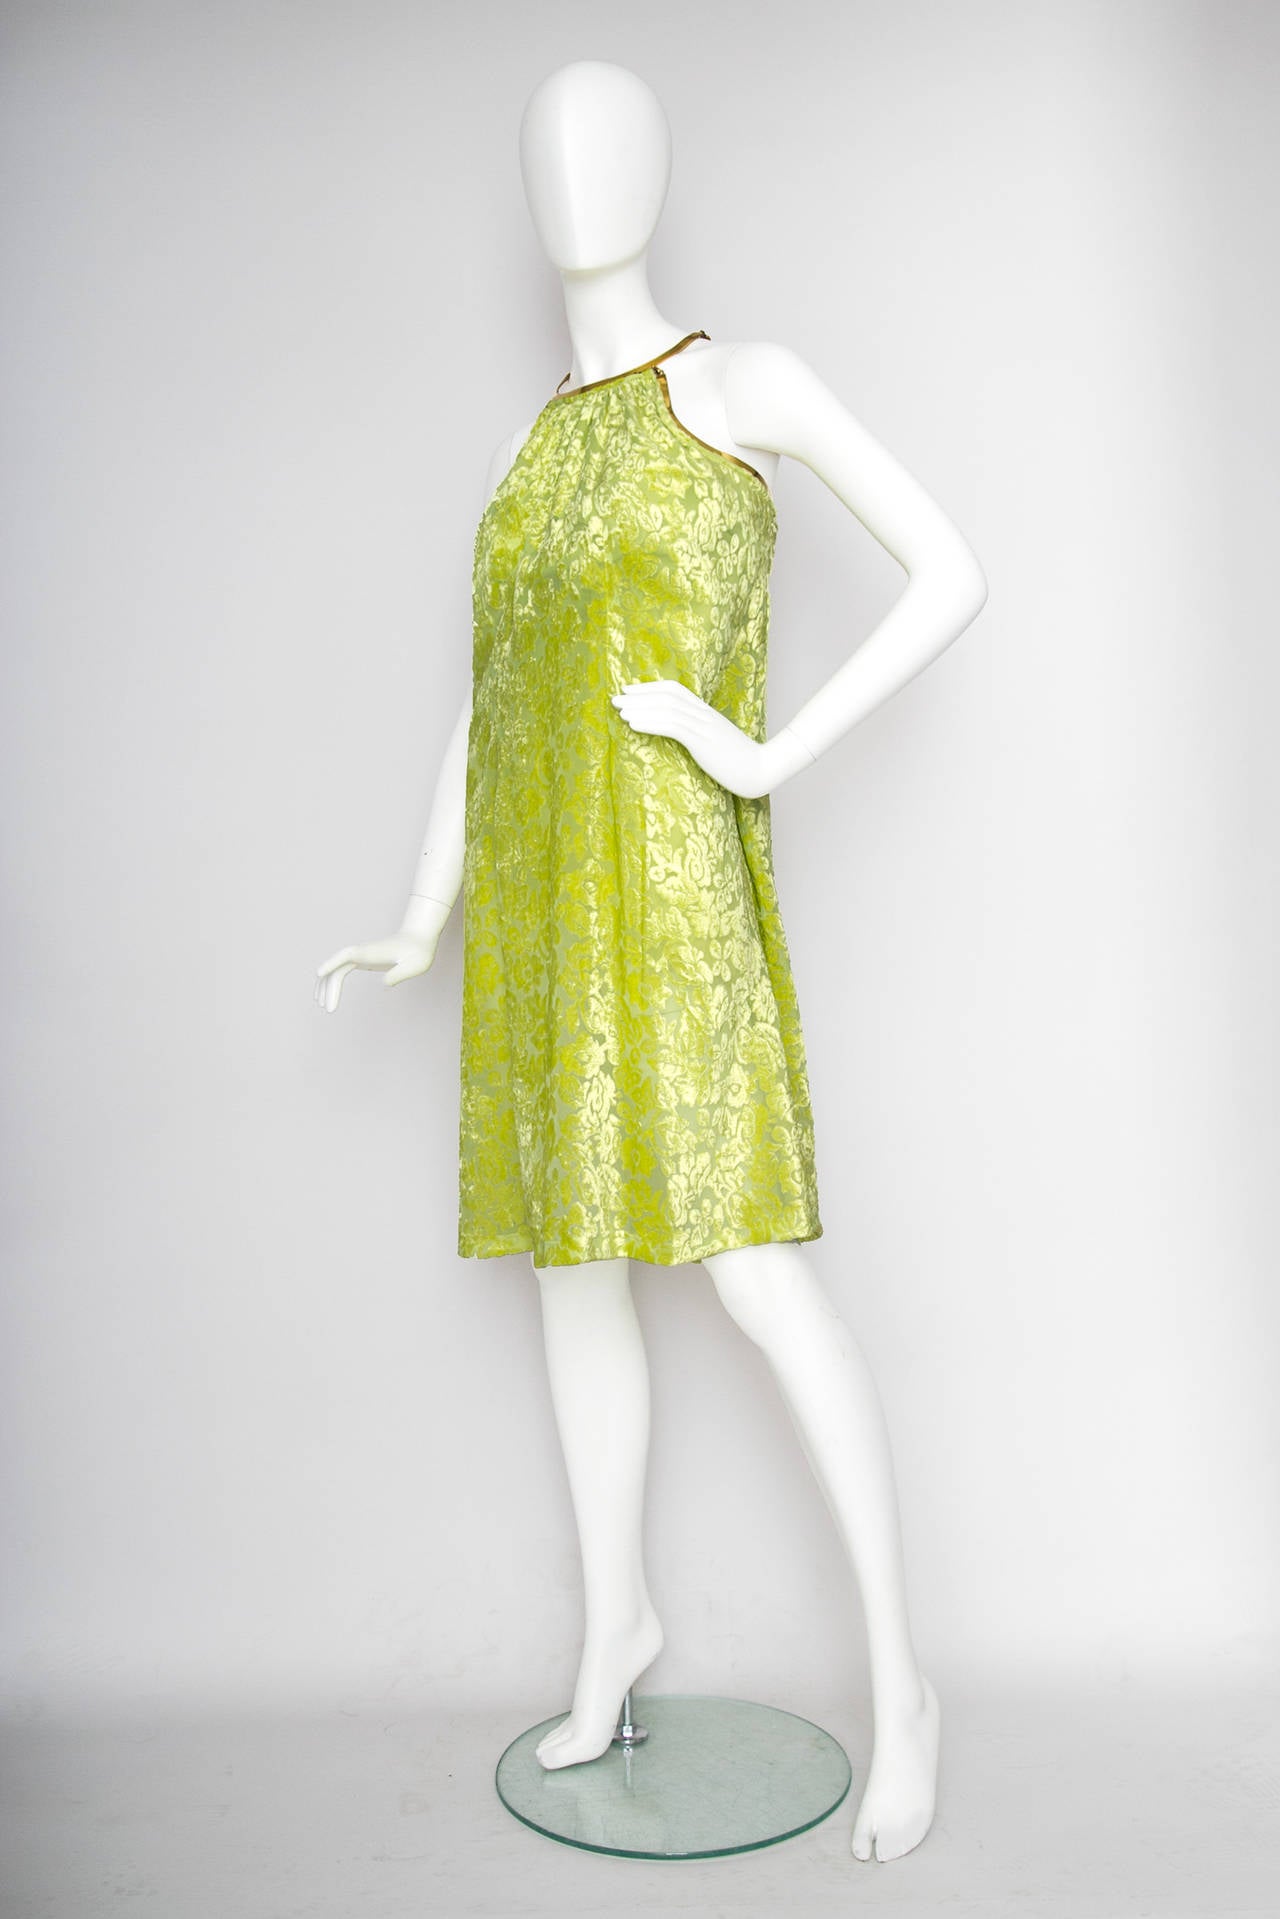 A stunning 1960s bright green a-line part dress with a burned velvet overlay. The dress has gold framing around the neckline and around the shoulders gathering the dress in the back. 

The dress closes in the back with a single hook & eye